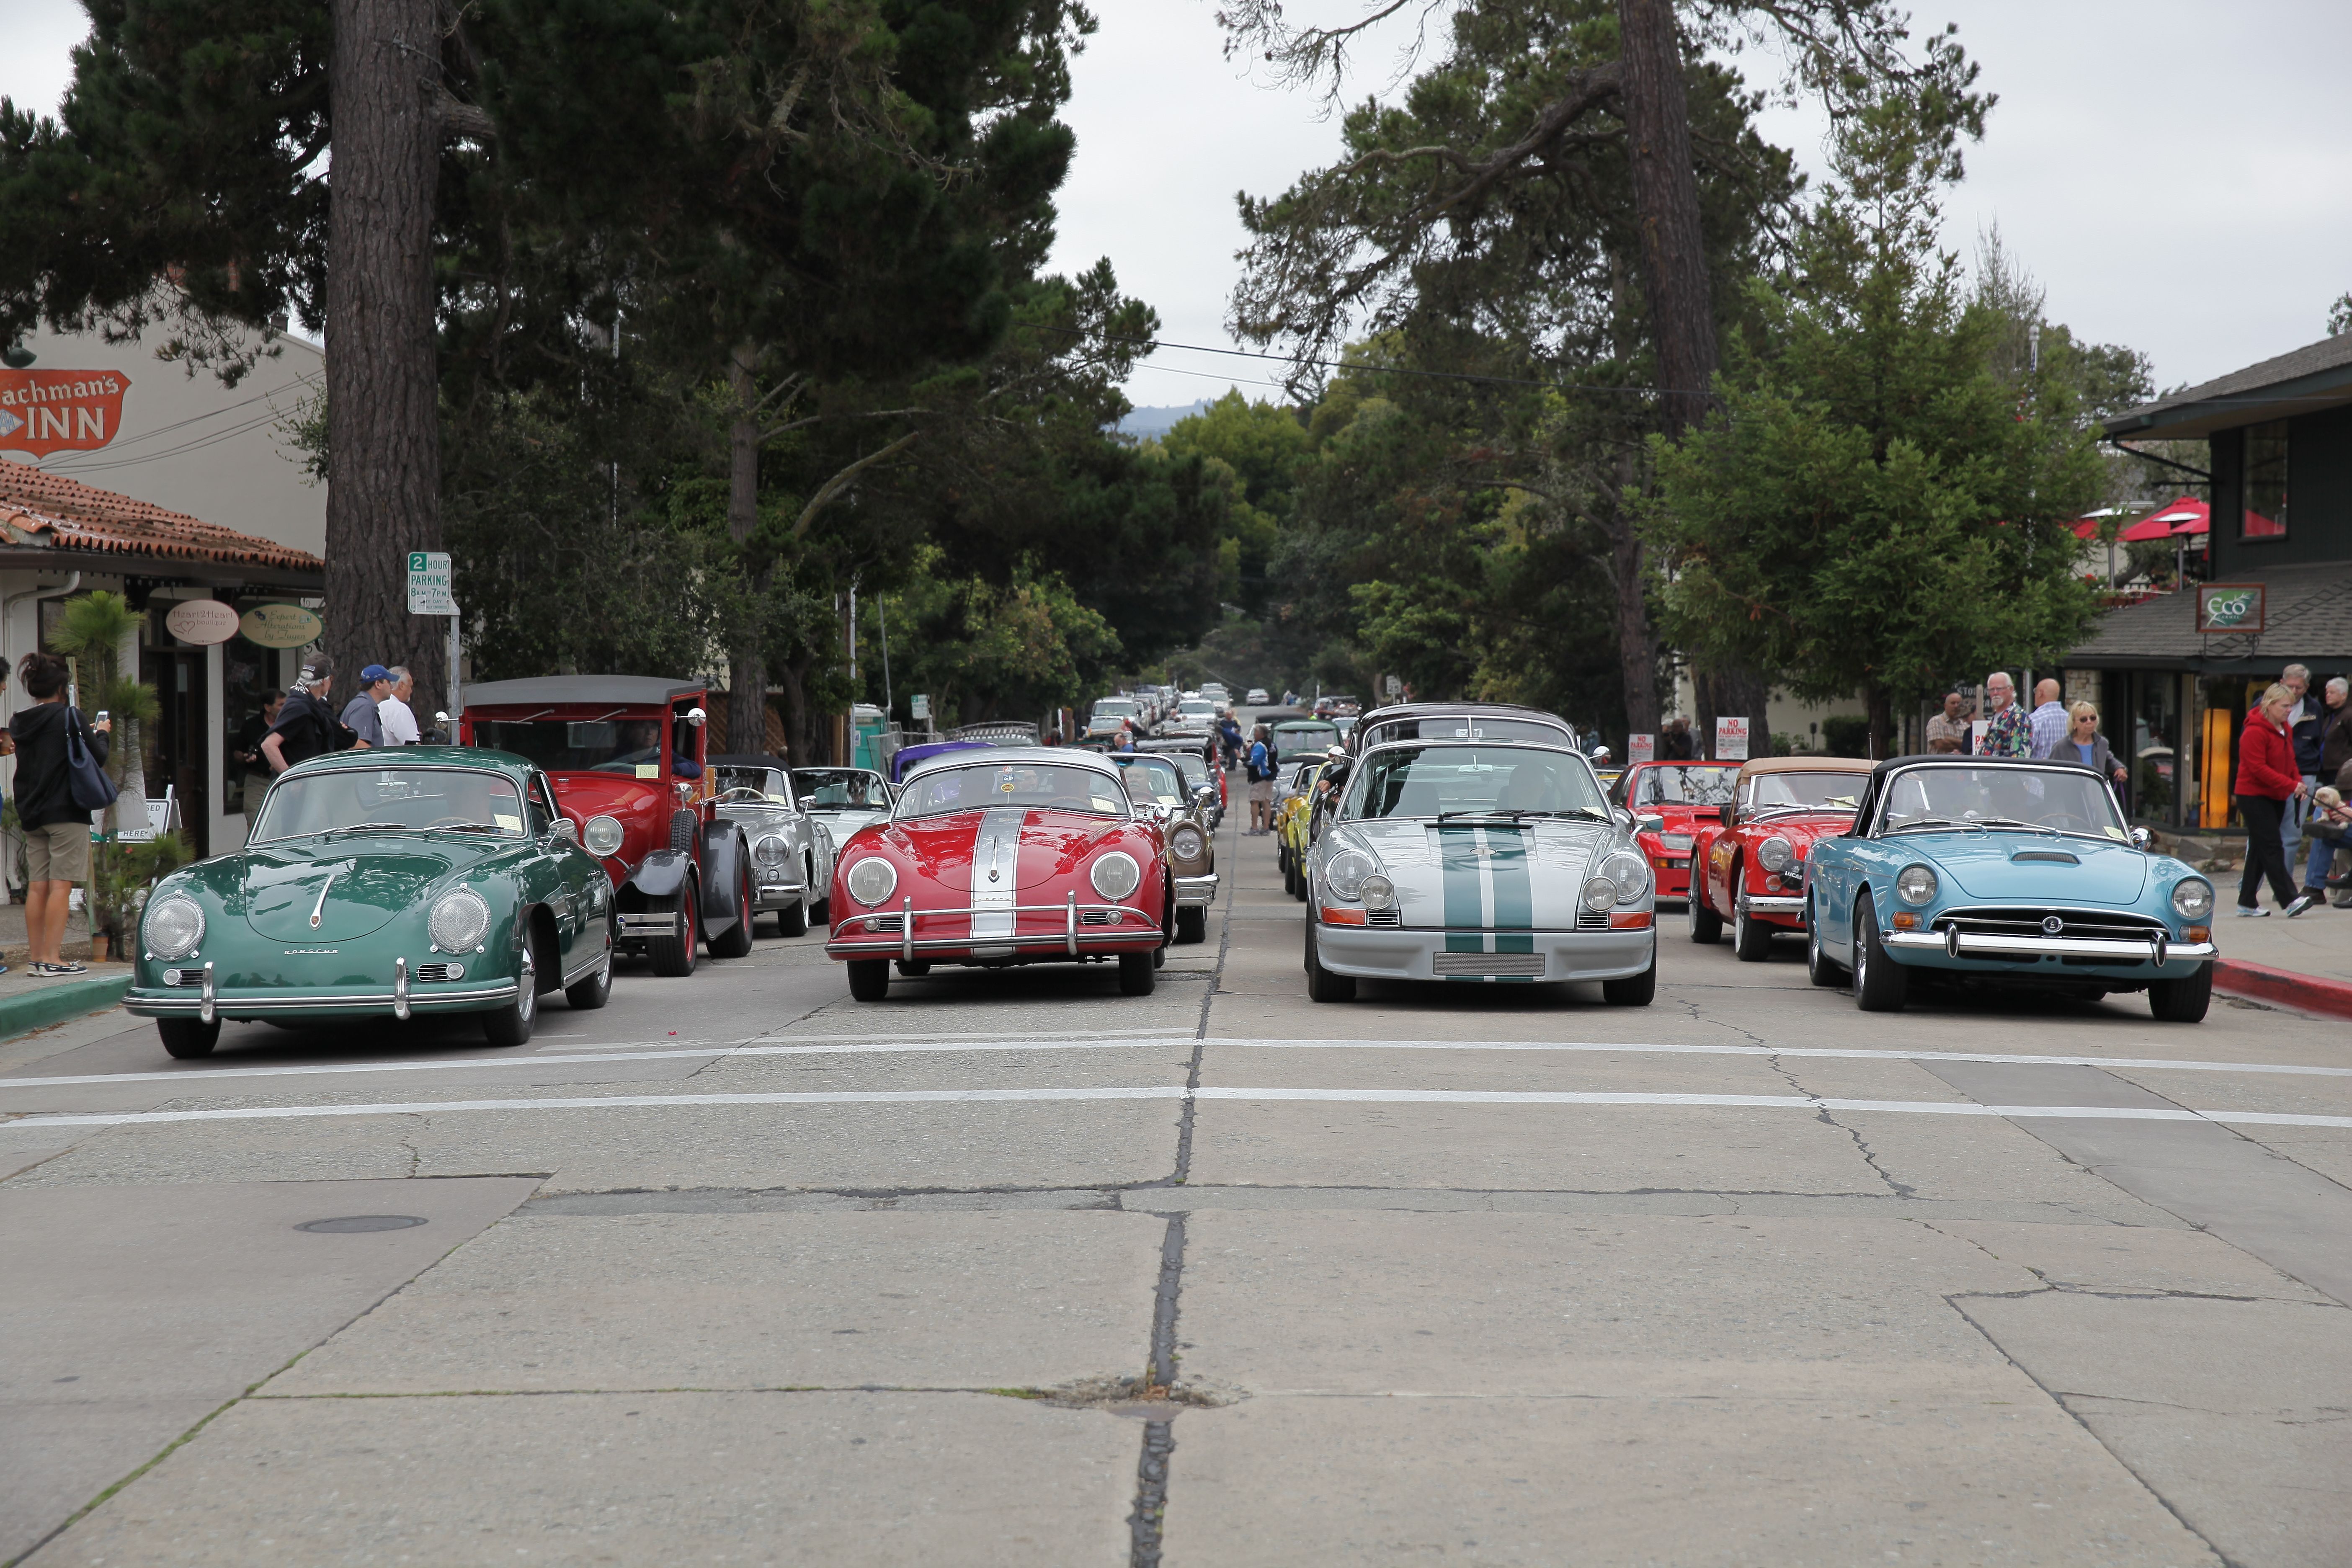 Concours on the Avenue Carmel